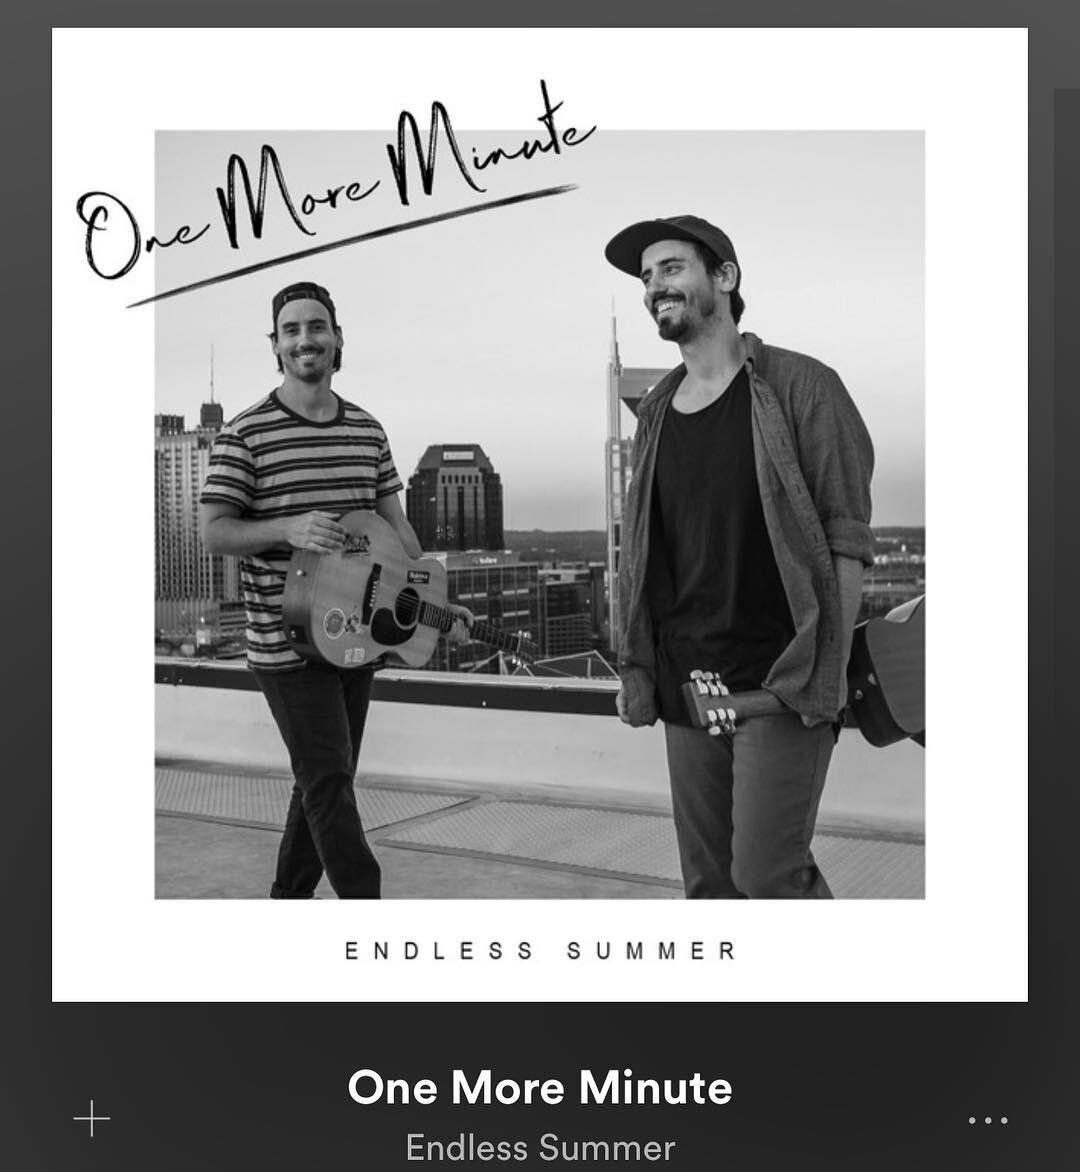 Check out @endlesssummermusic brand new original song One More Minute 🎧 They wrote it, played all the instruments on it, produced and even mixed it, so it&rsquo;s a pretty hands on record. #musictravellove 📷: @tanner.gallagher .
.
.
.
.
#nashville
